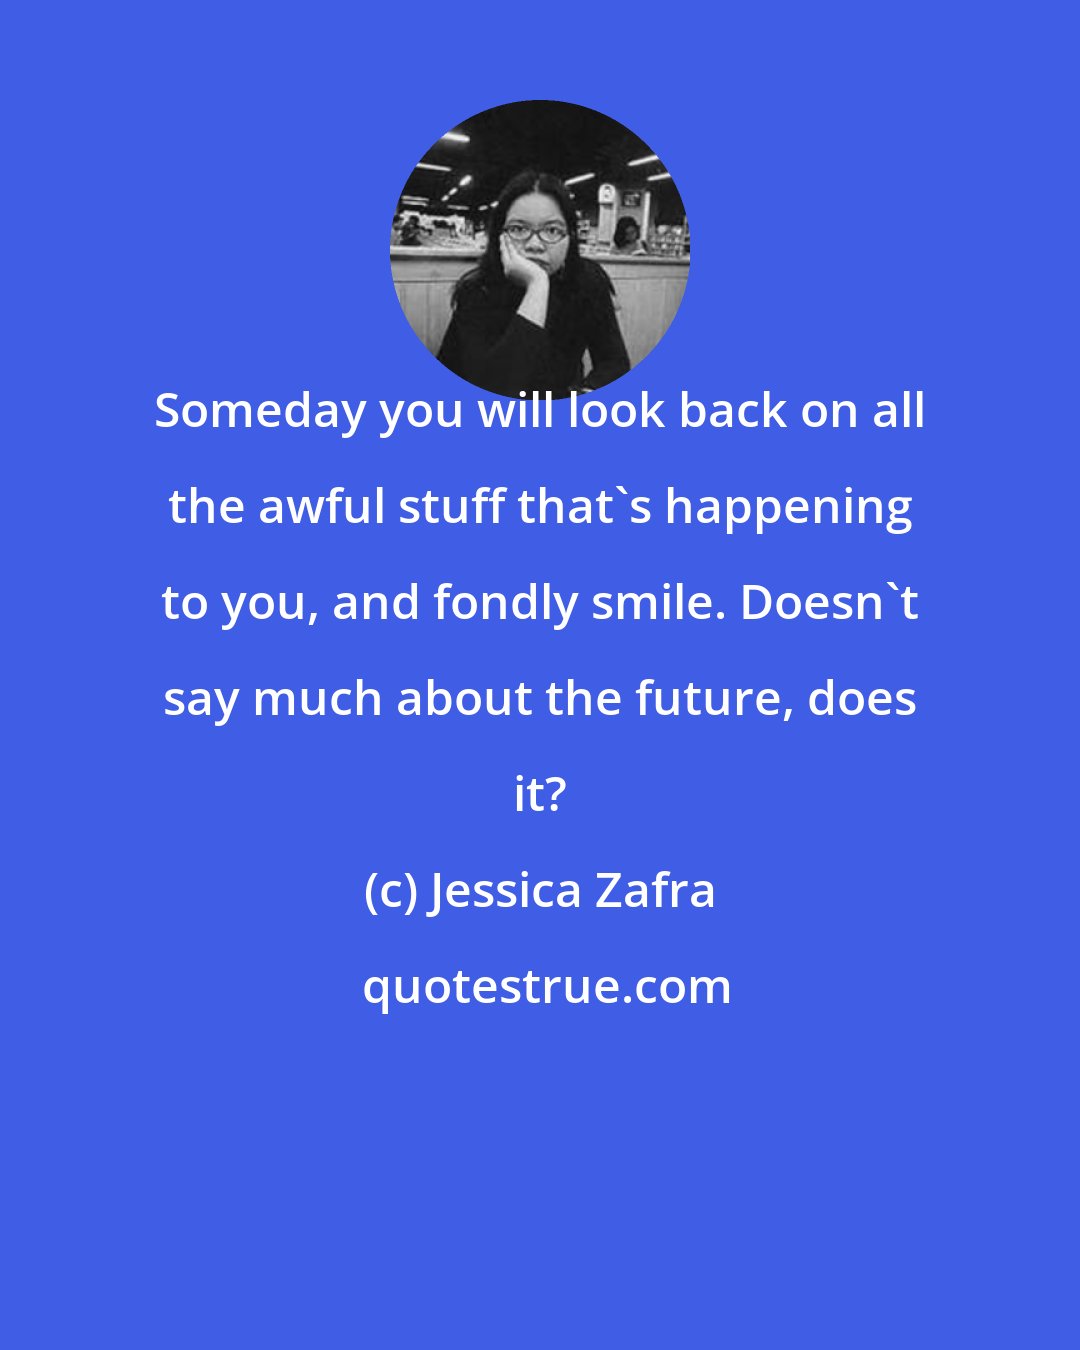 Jessica Zafra: Someday you will look back on all the awful stuff that's happening to you, and fondly smile. Doesn't say much about the future, does it?